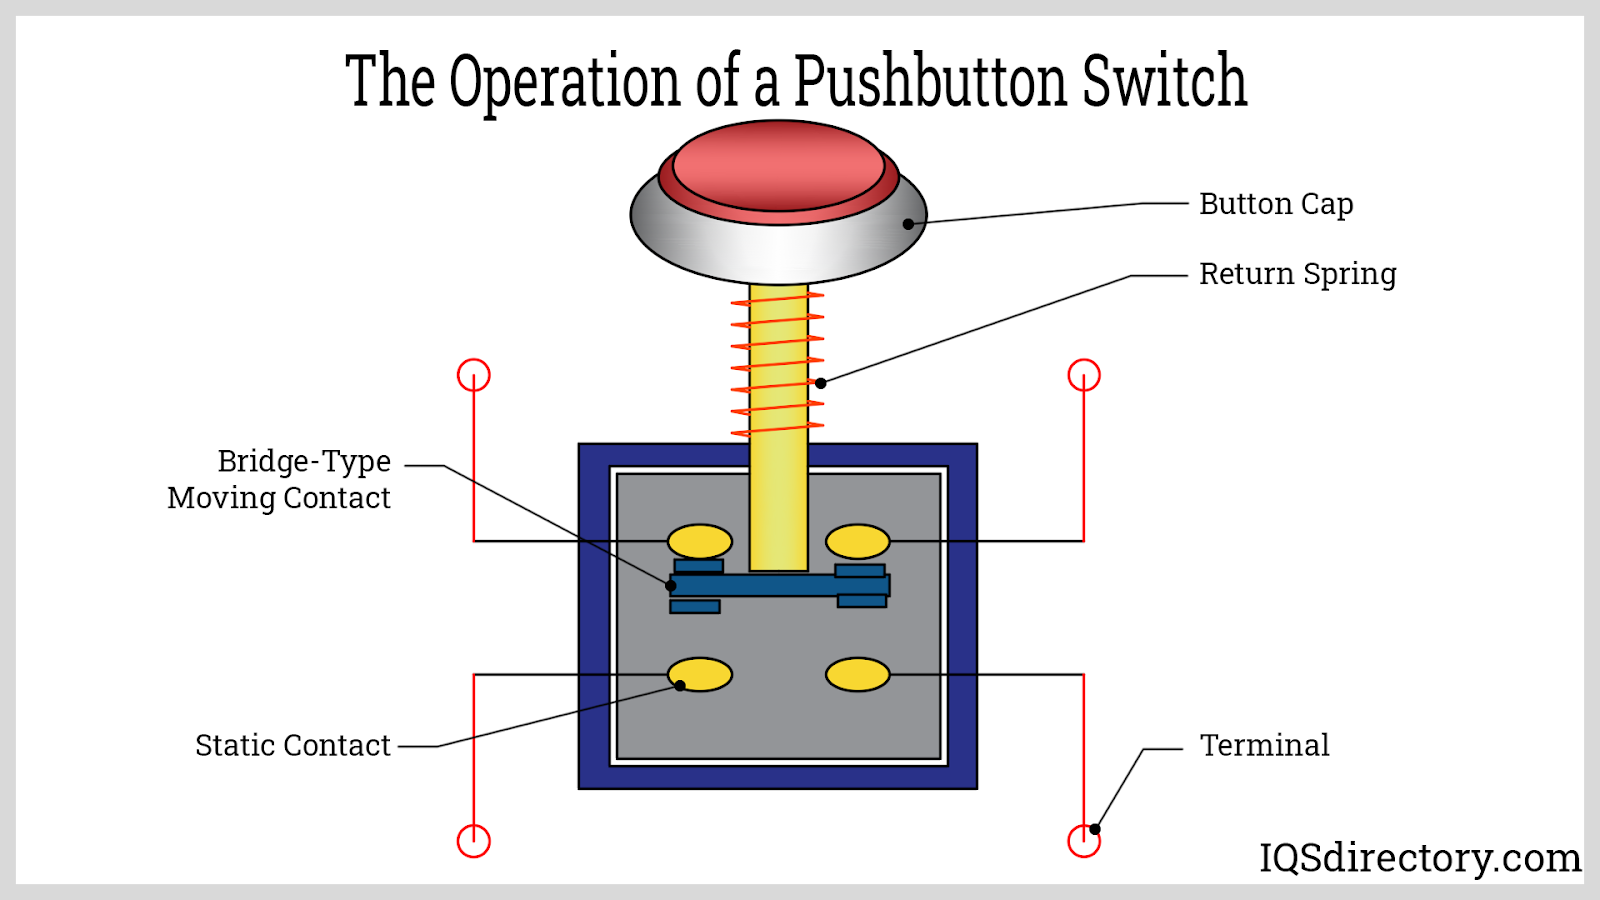 The Operation of a Push Button Switch